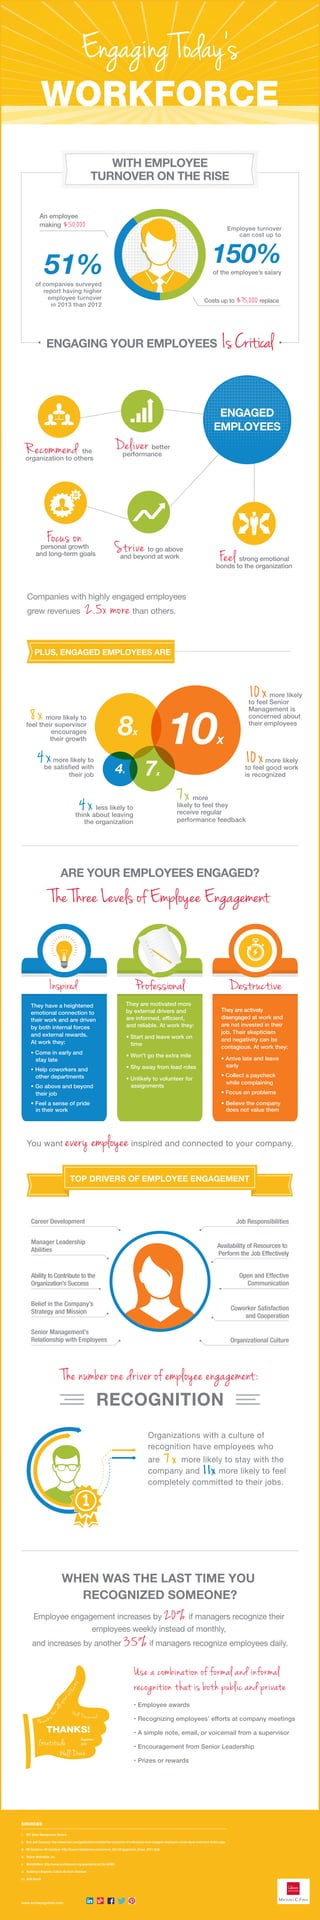 Companies with highly engaged employees
grew revenues 2.5x more than others.
 